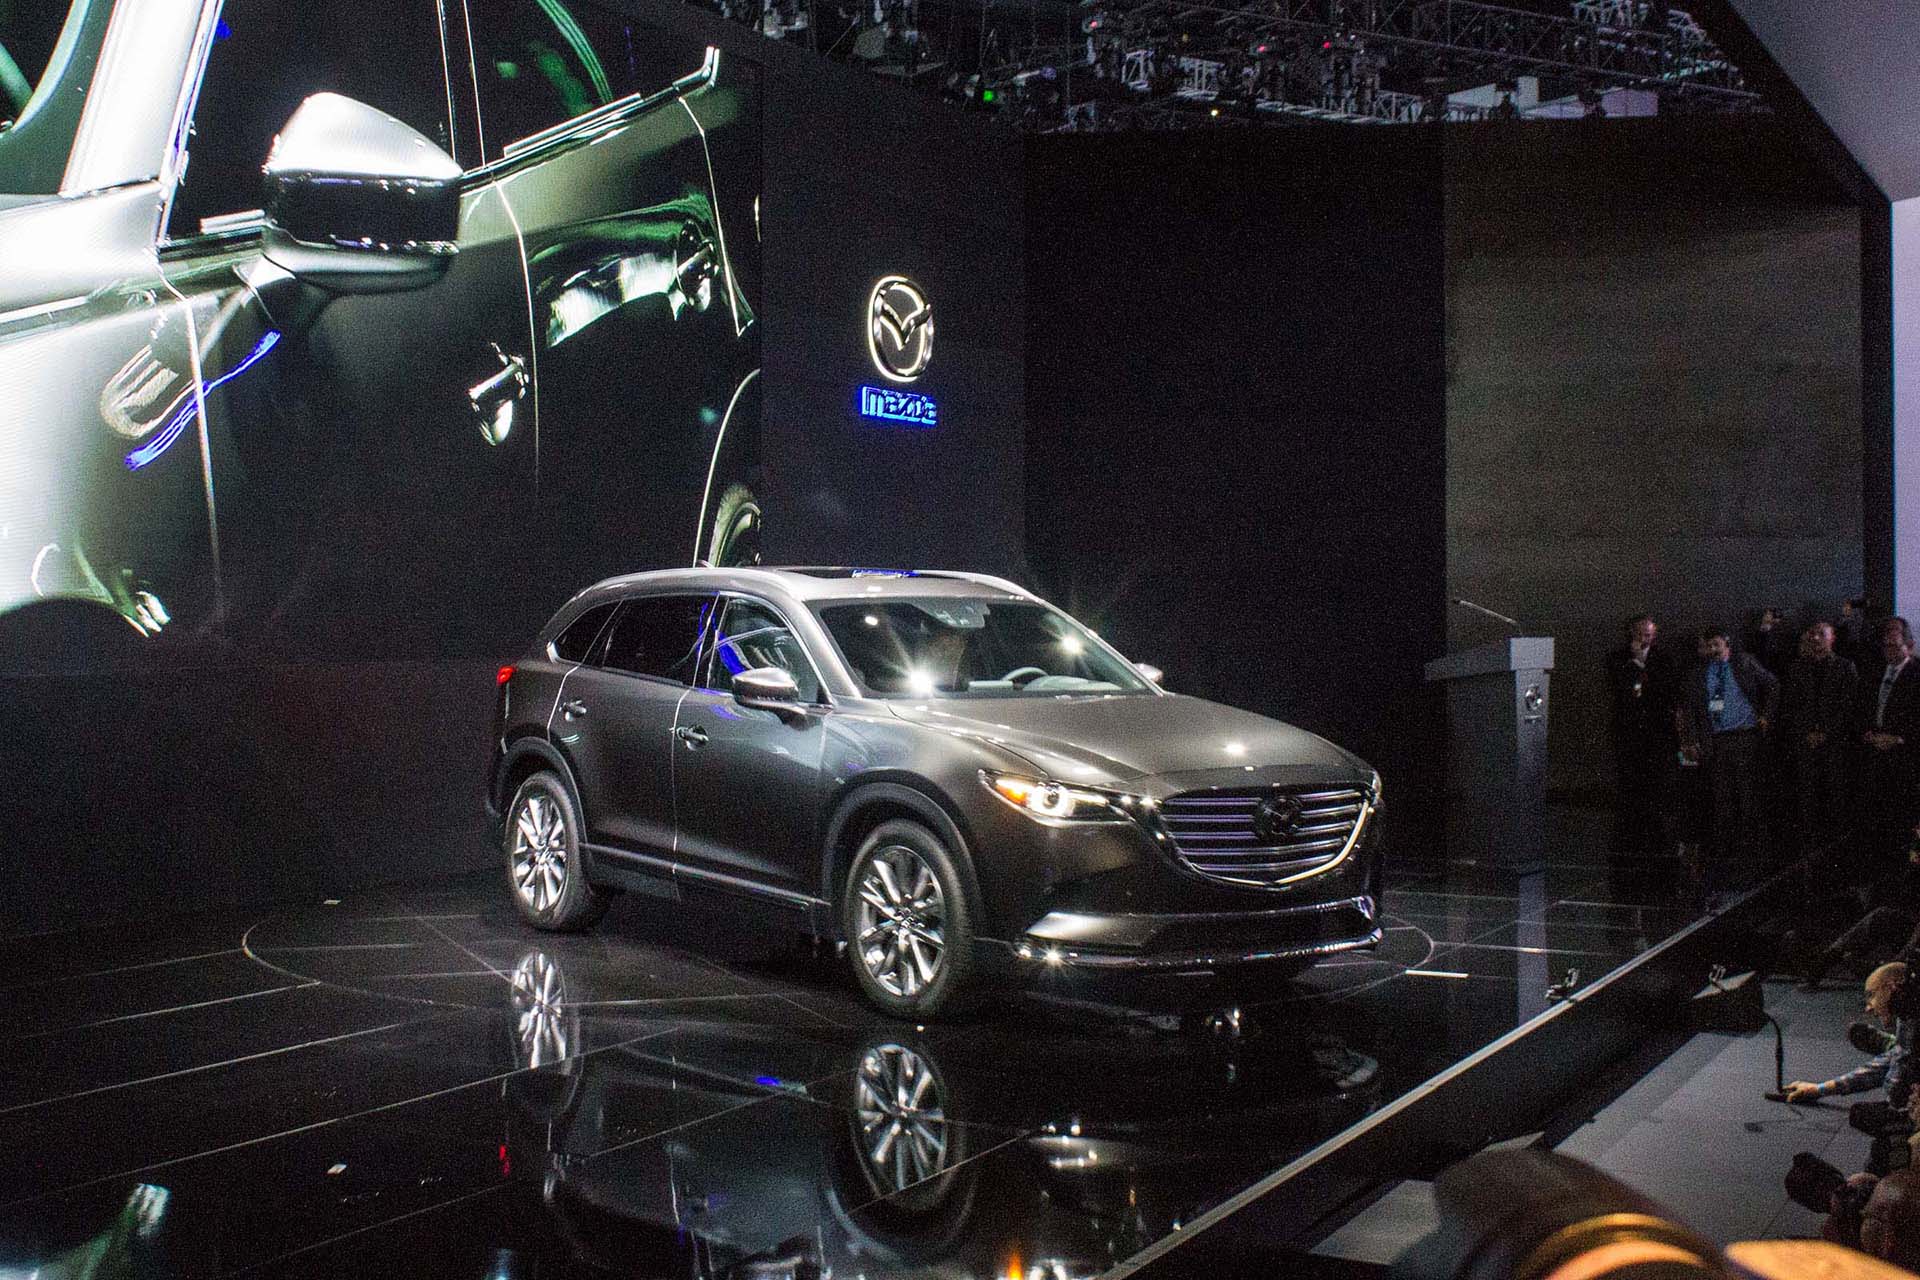 After updating all of its smaller vehicles with Kodo design language and Skyactiv engineering, the three-row, seven-seat CX-9 was long overdue to join Mazda’s more modern offerings. As its largest, priciest offering, the CX-9 is a crucial vehicle for Mazda’s success, especially in North America, whose appetite for SUVs shows no signs of slowing.